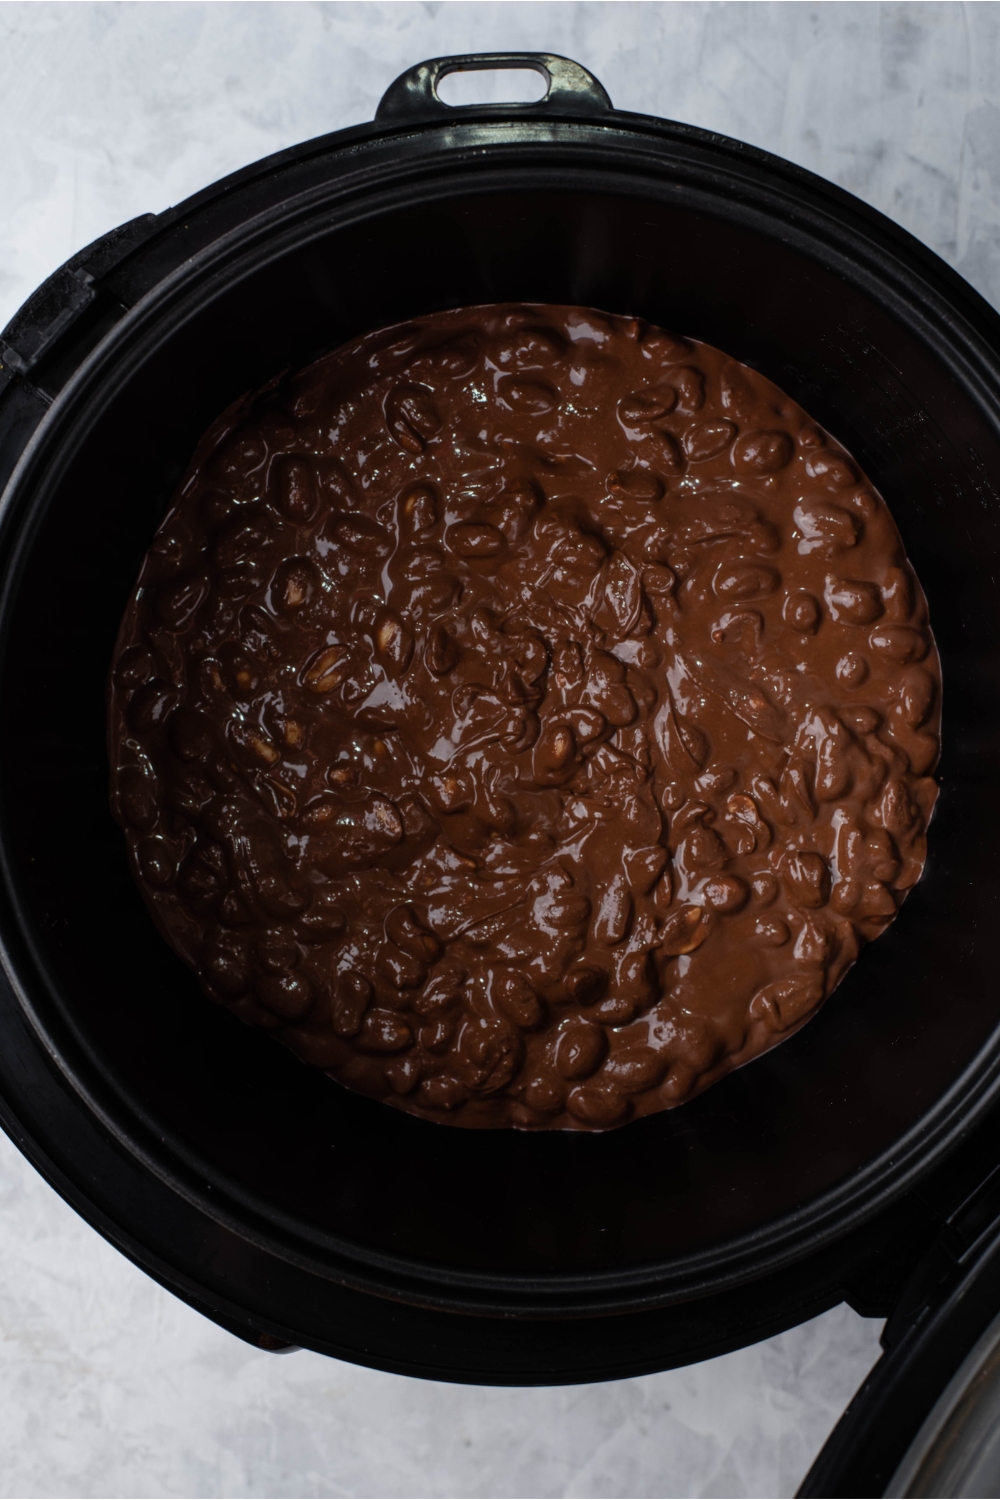 Crock pot filled with peanuts covered in melted chocolate.